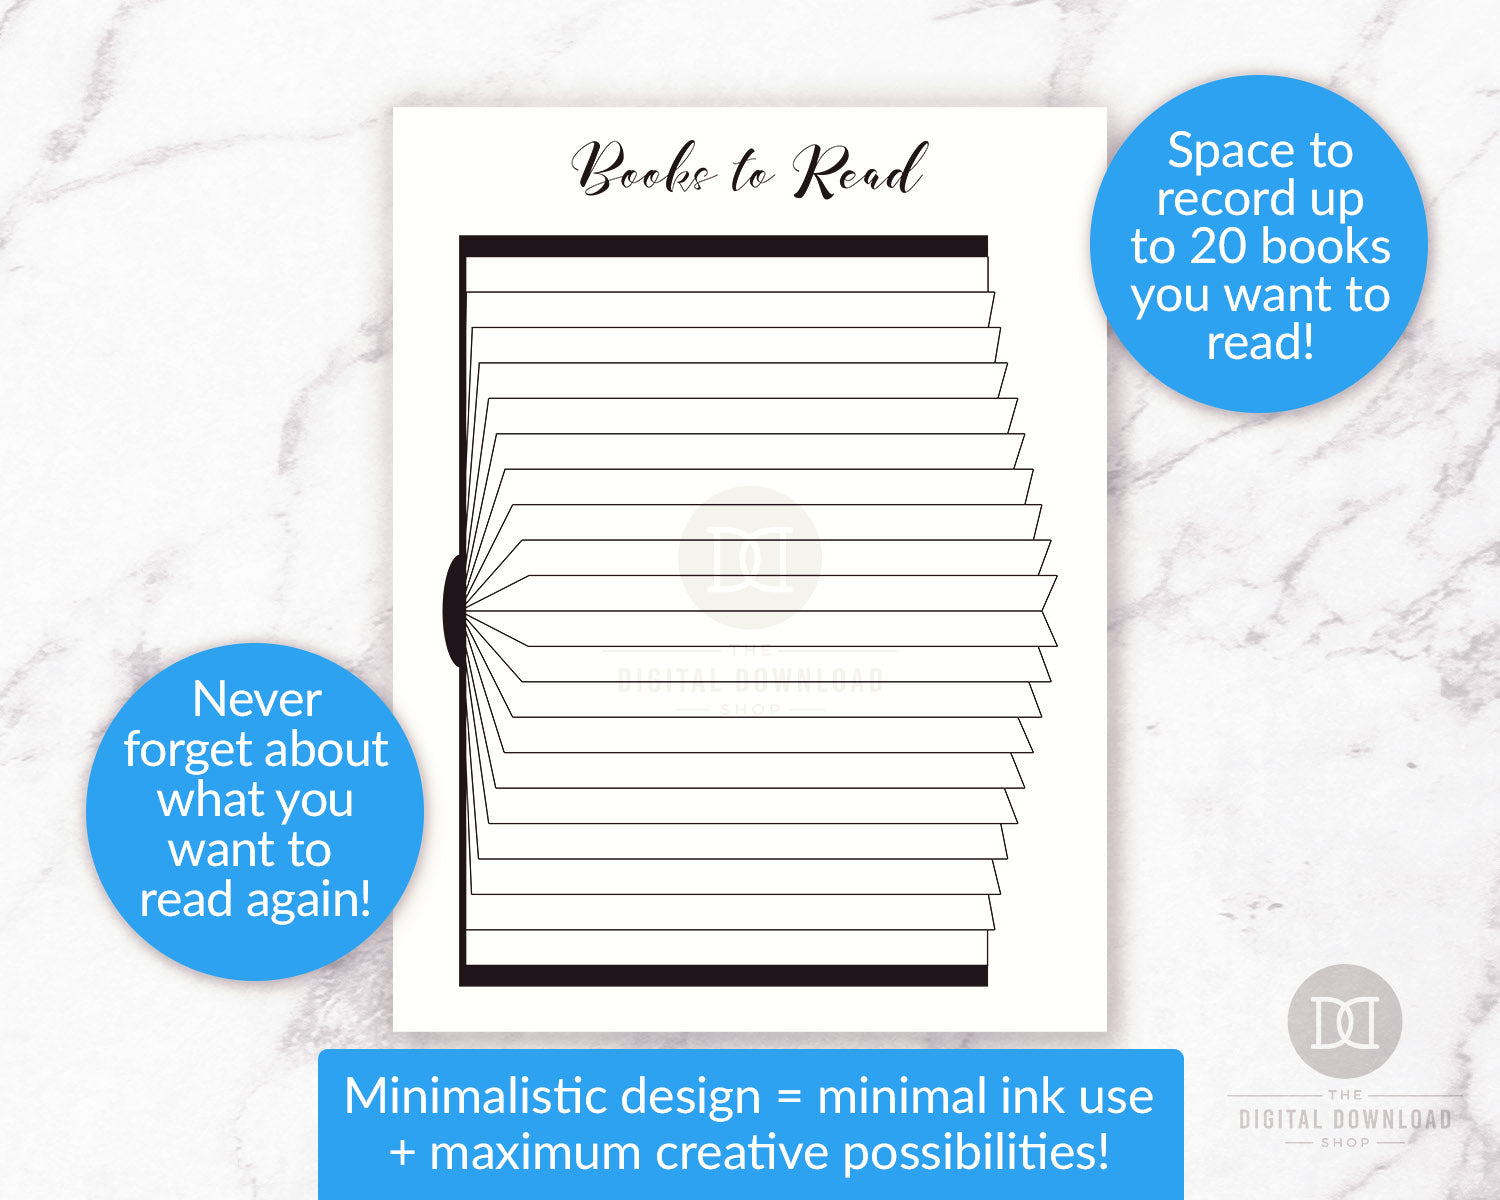 Books to read, Bullet Journal, Journal pages, Bujo template, Bujo  printable, Instant download